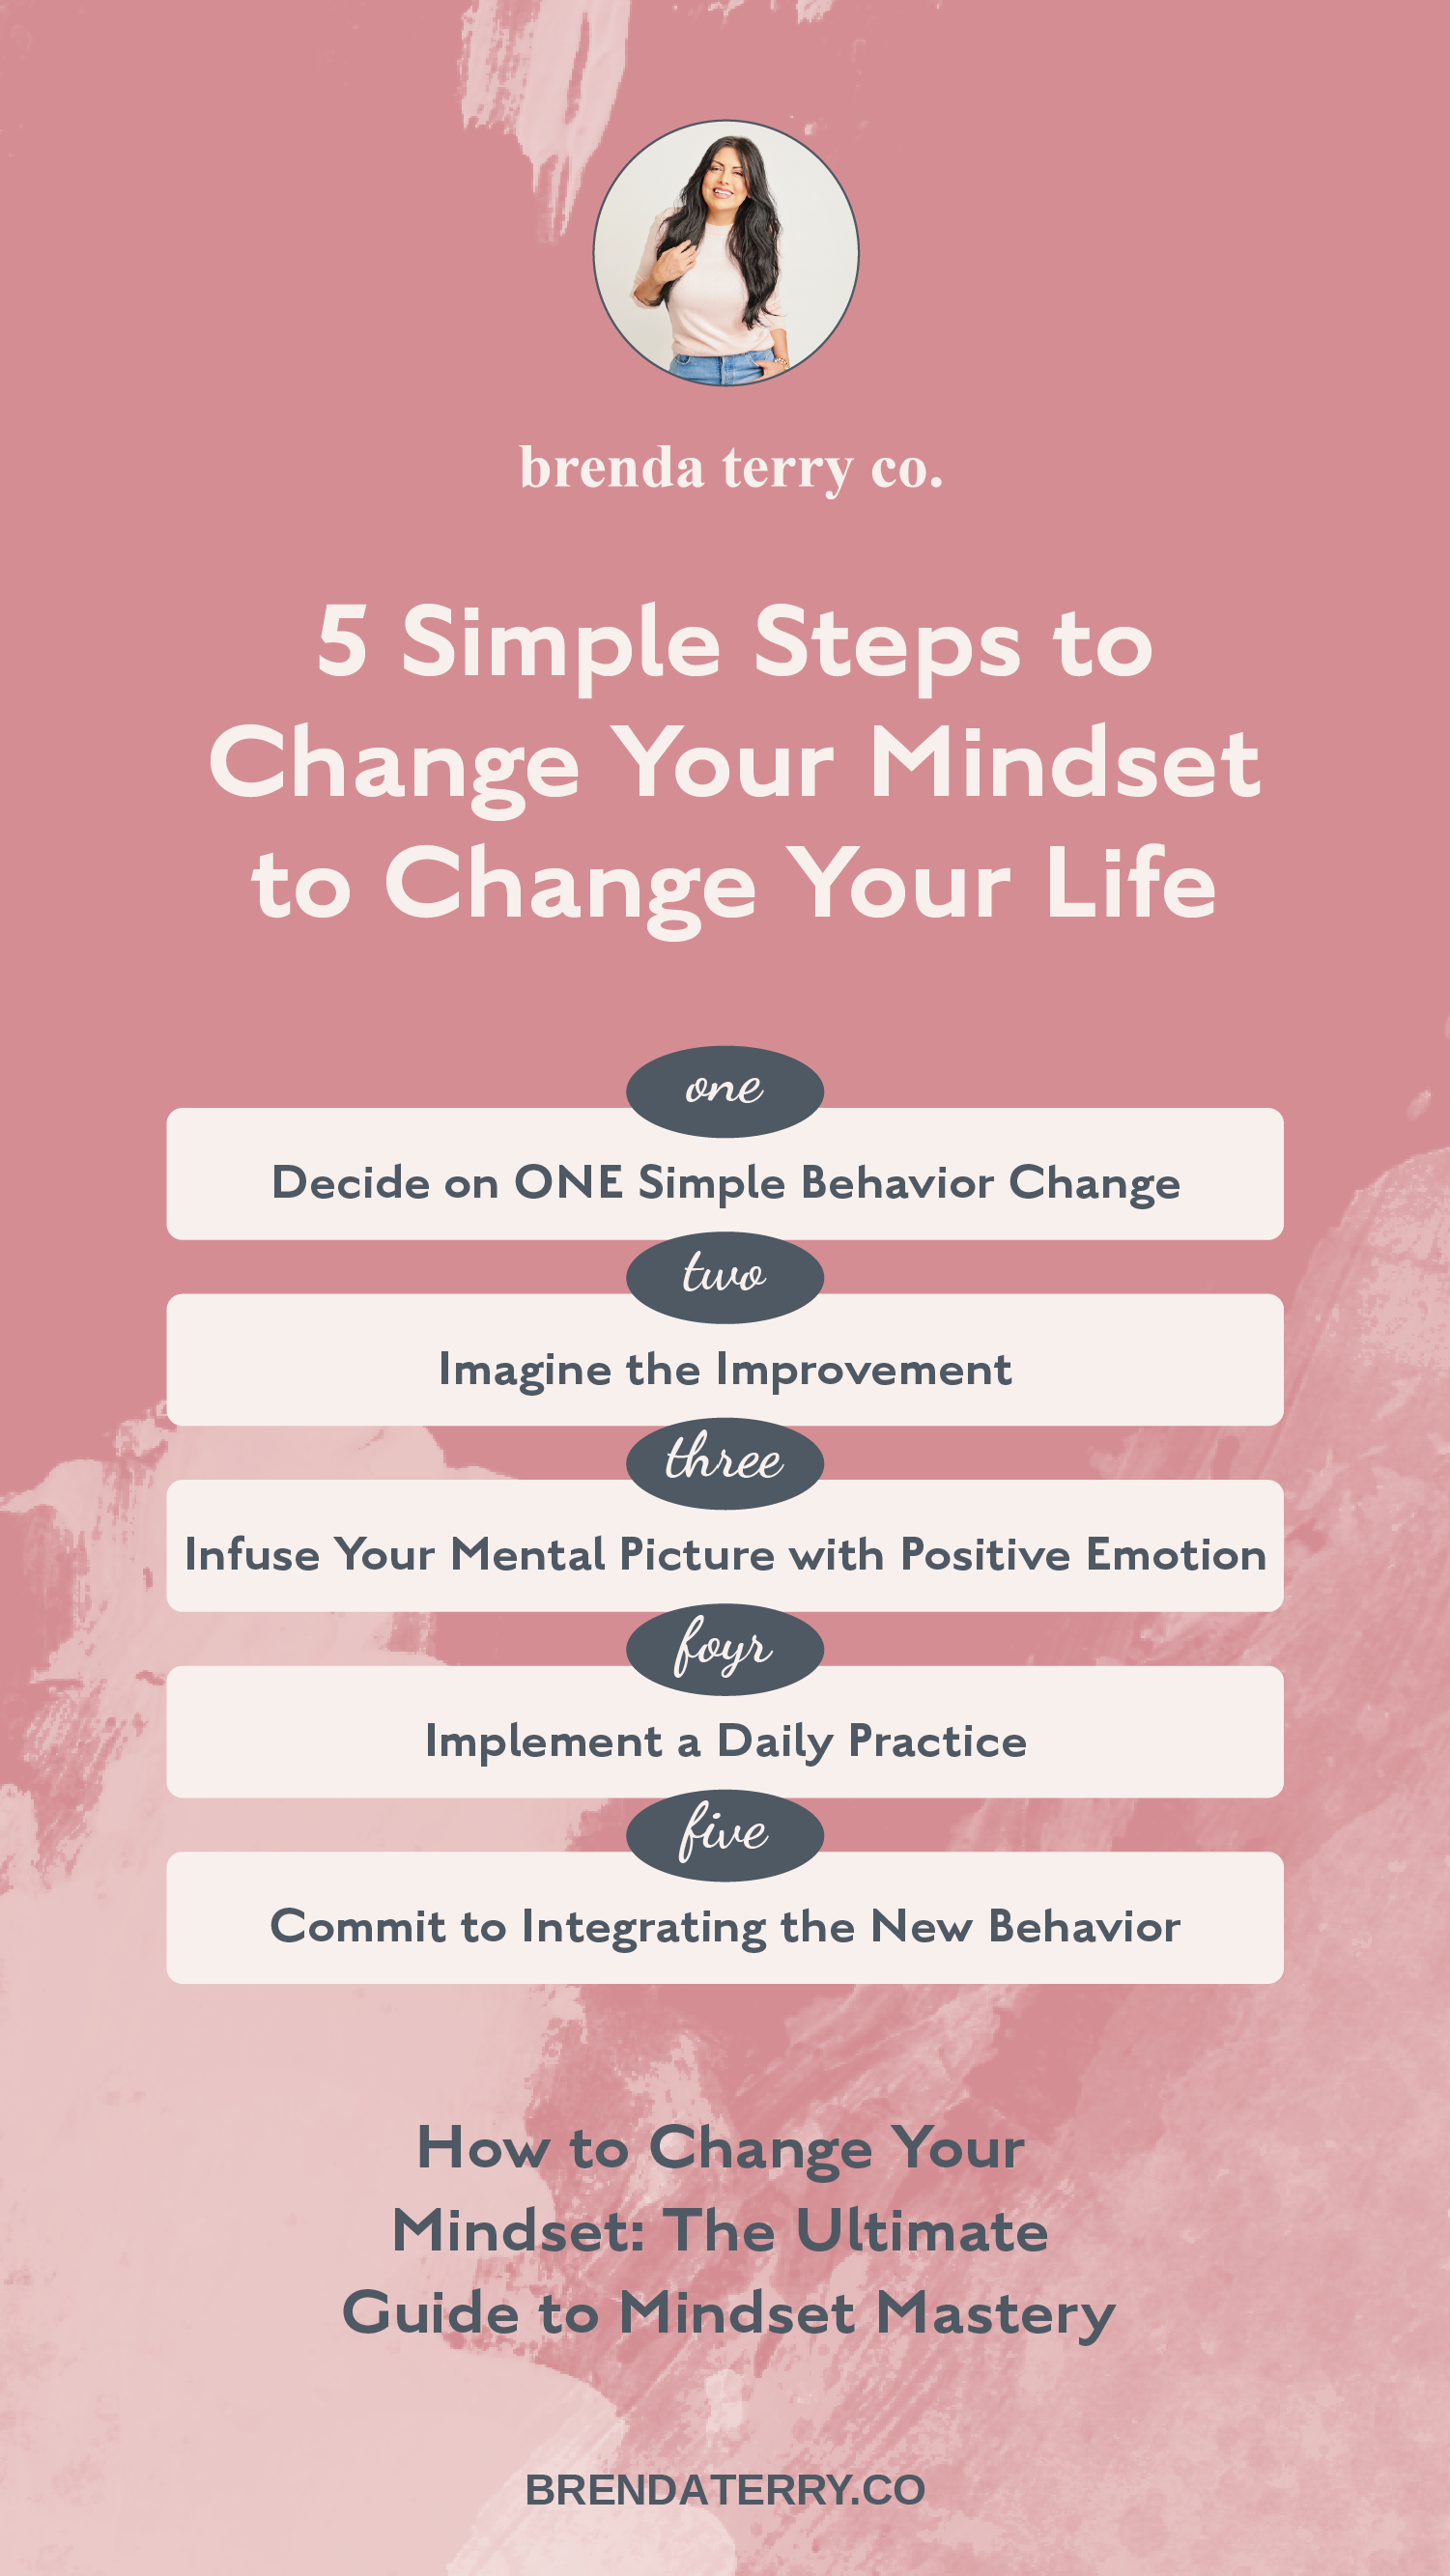 How to Change Your Mindset The Ultimate Guide to Mindset Mastery